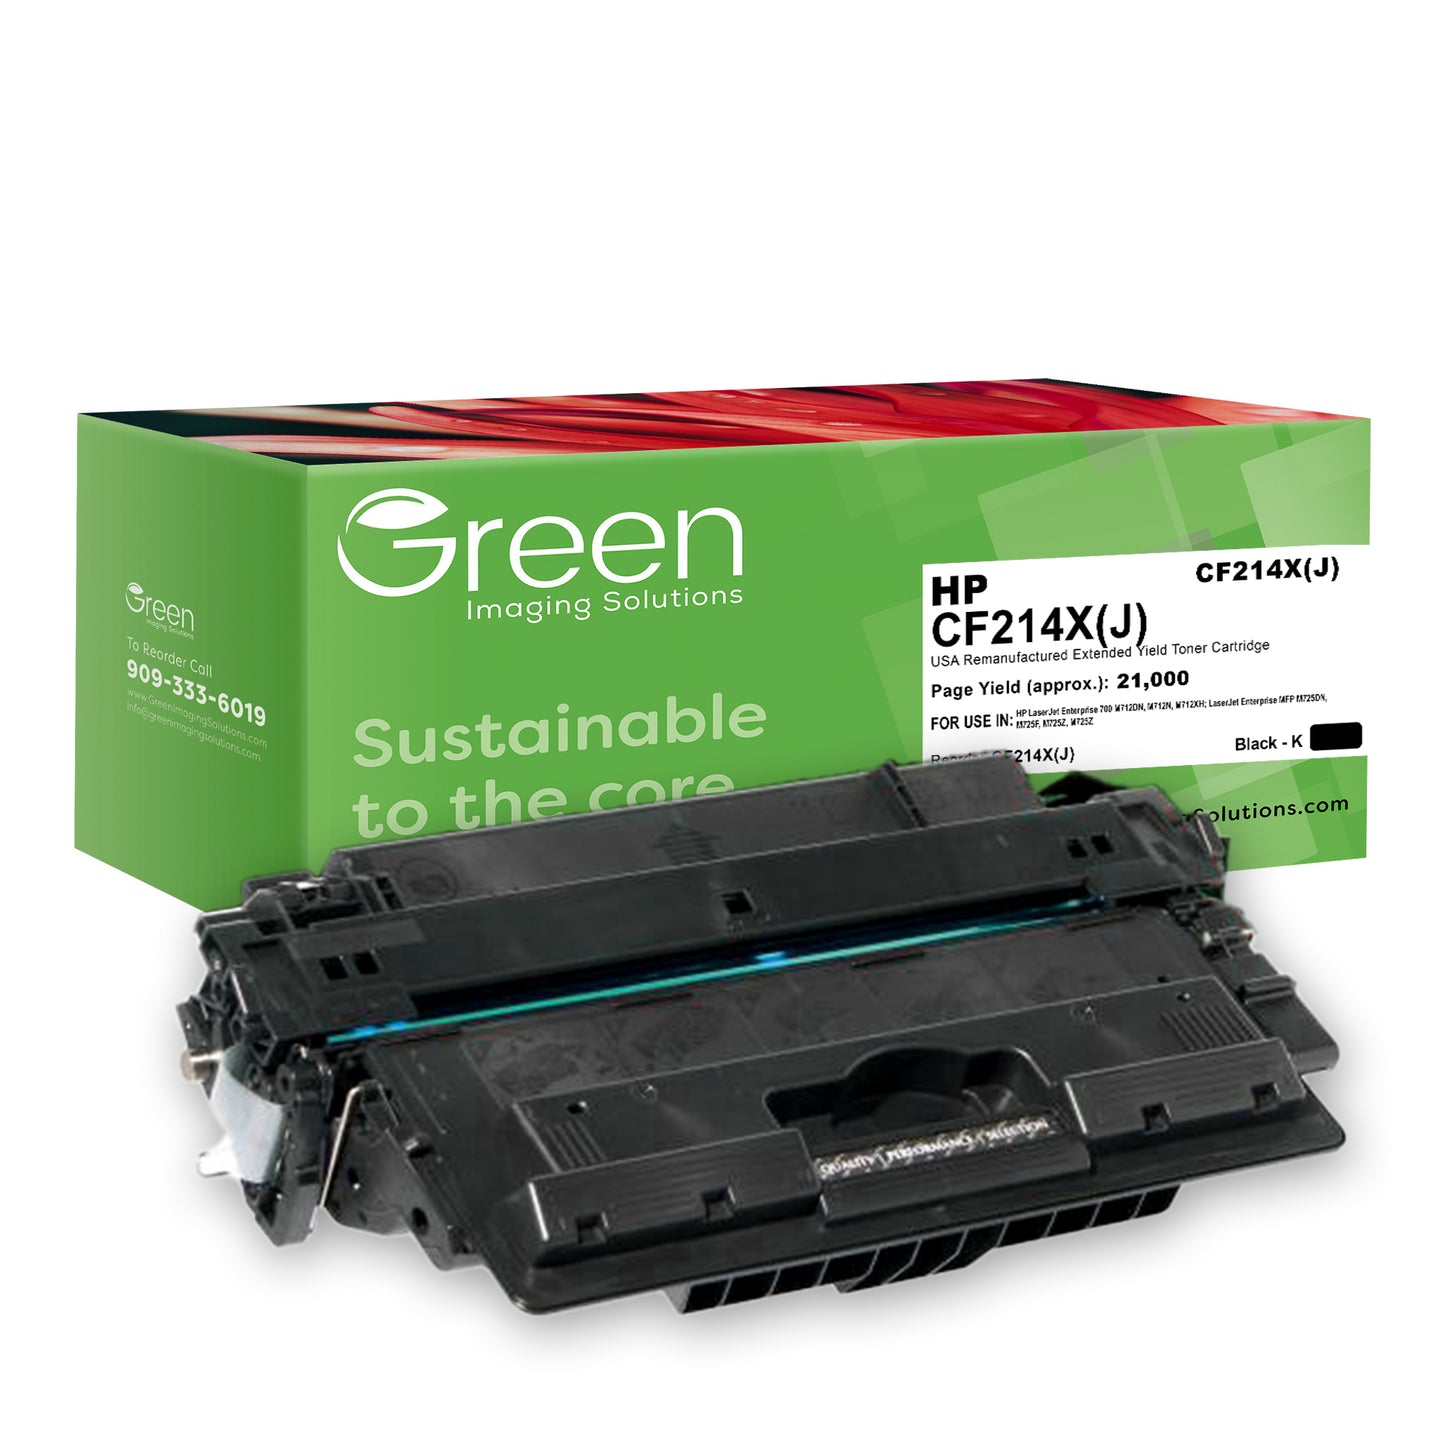 GIS USA Remanufactured Extended Yield Toner Cartridge for HP CF214X